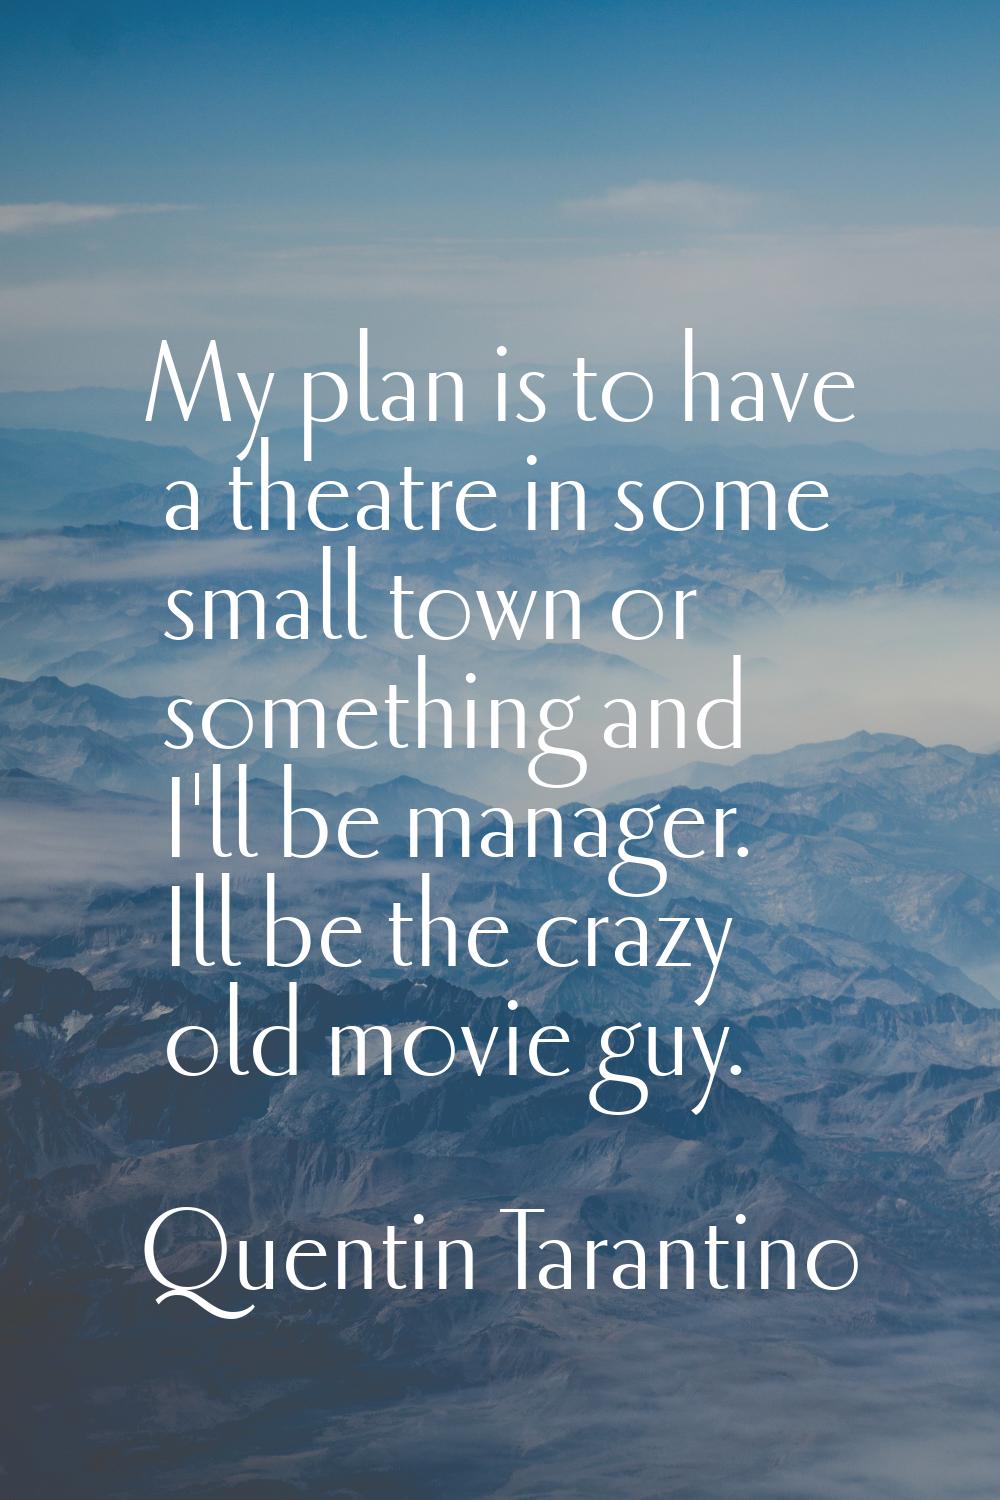 My plan is to have a theatre in some small town or something and I'll be manager. Ill be the crazy 